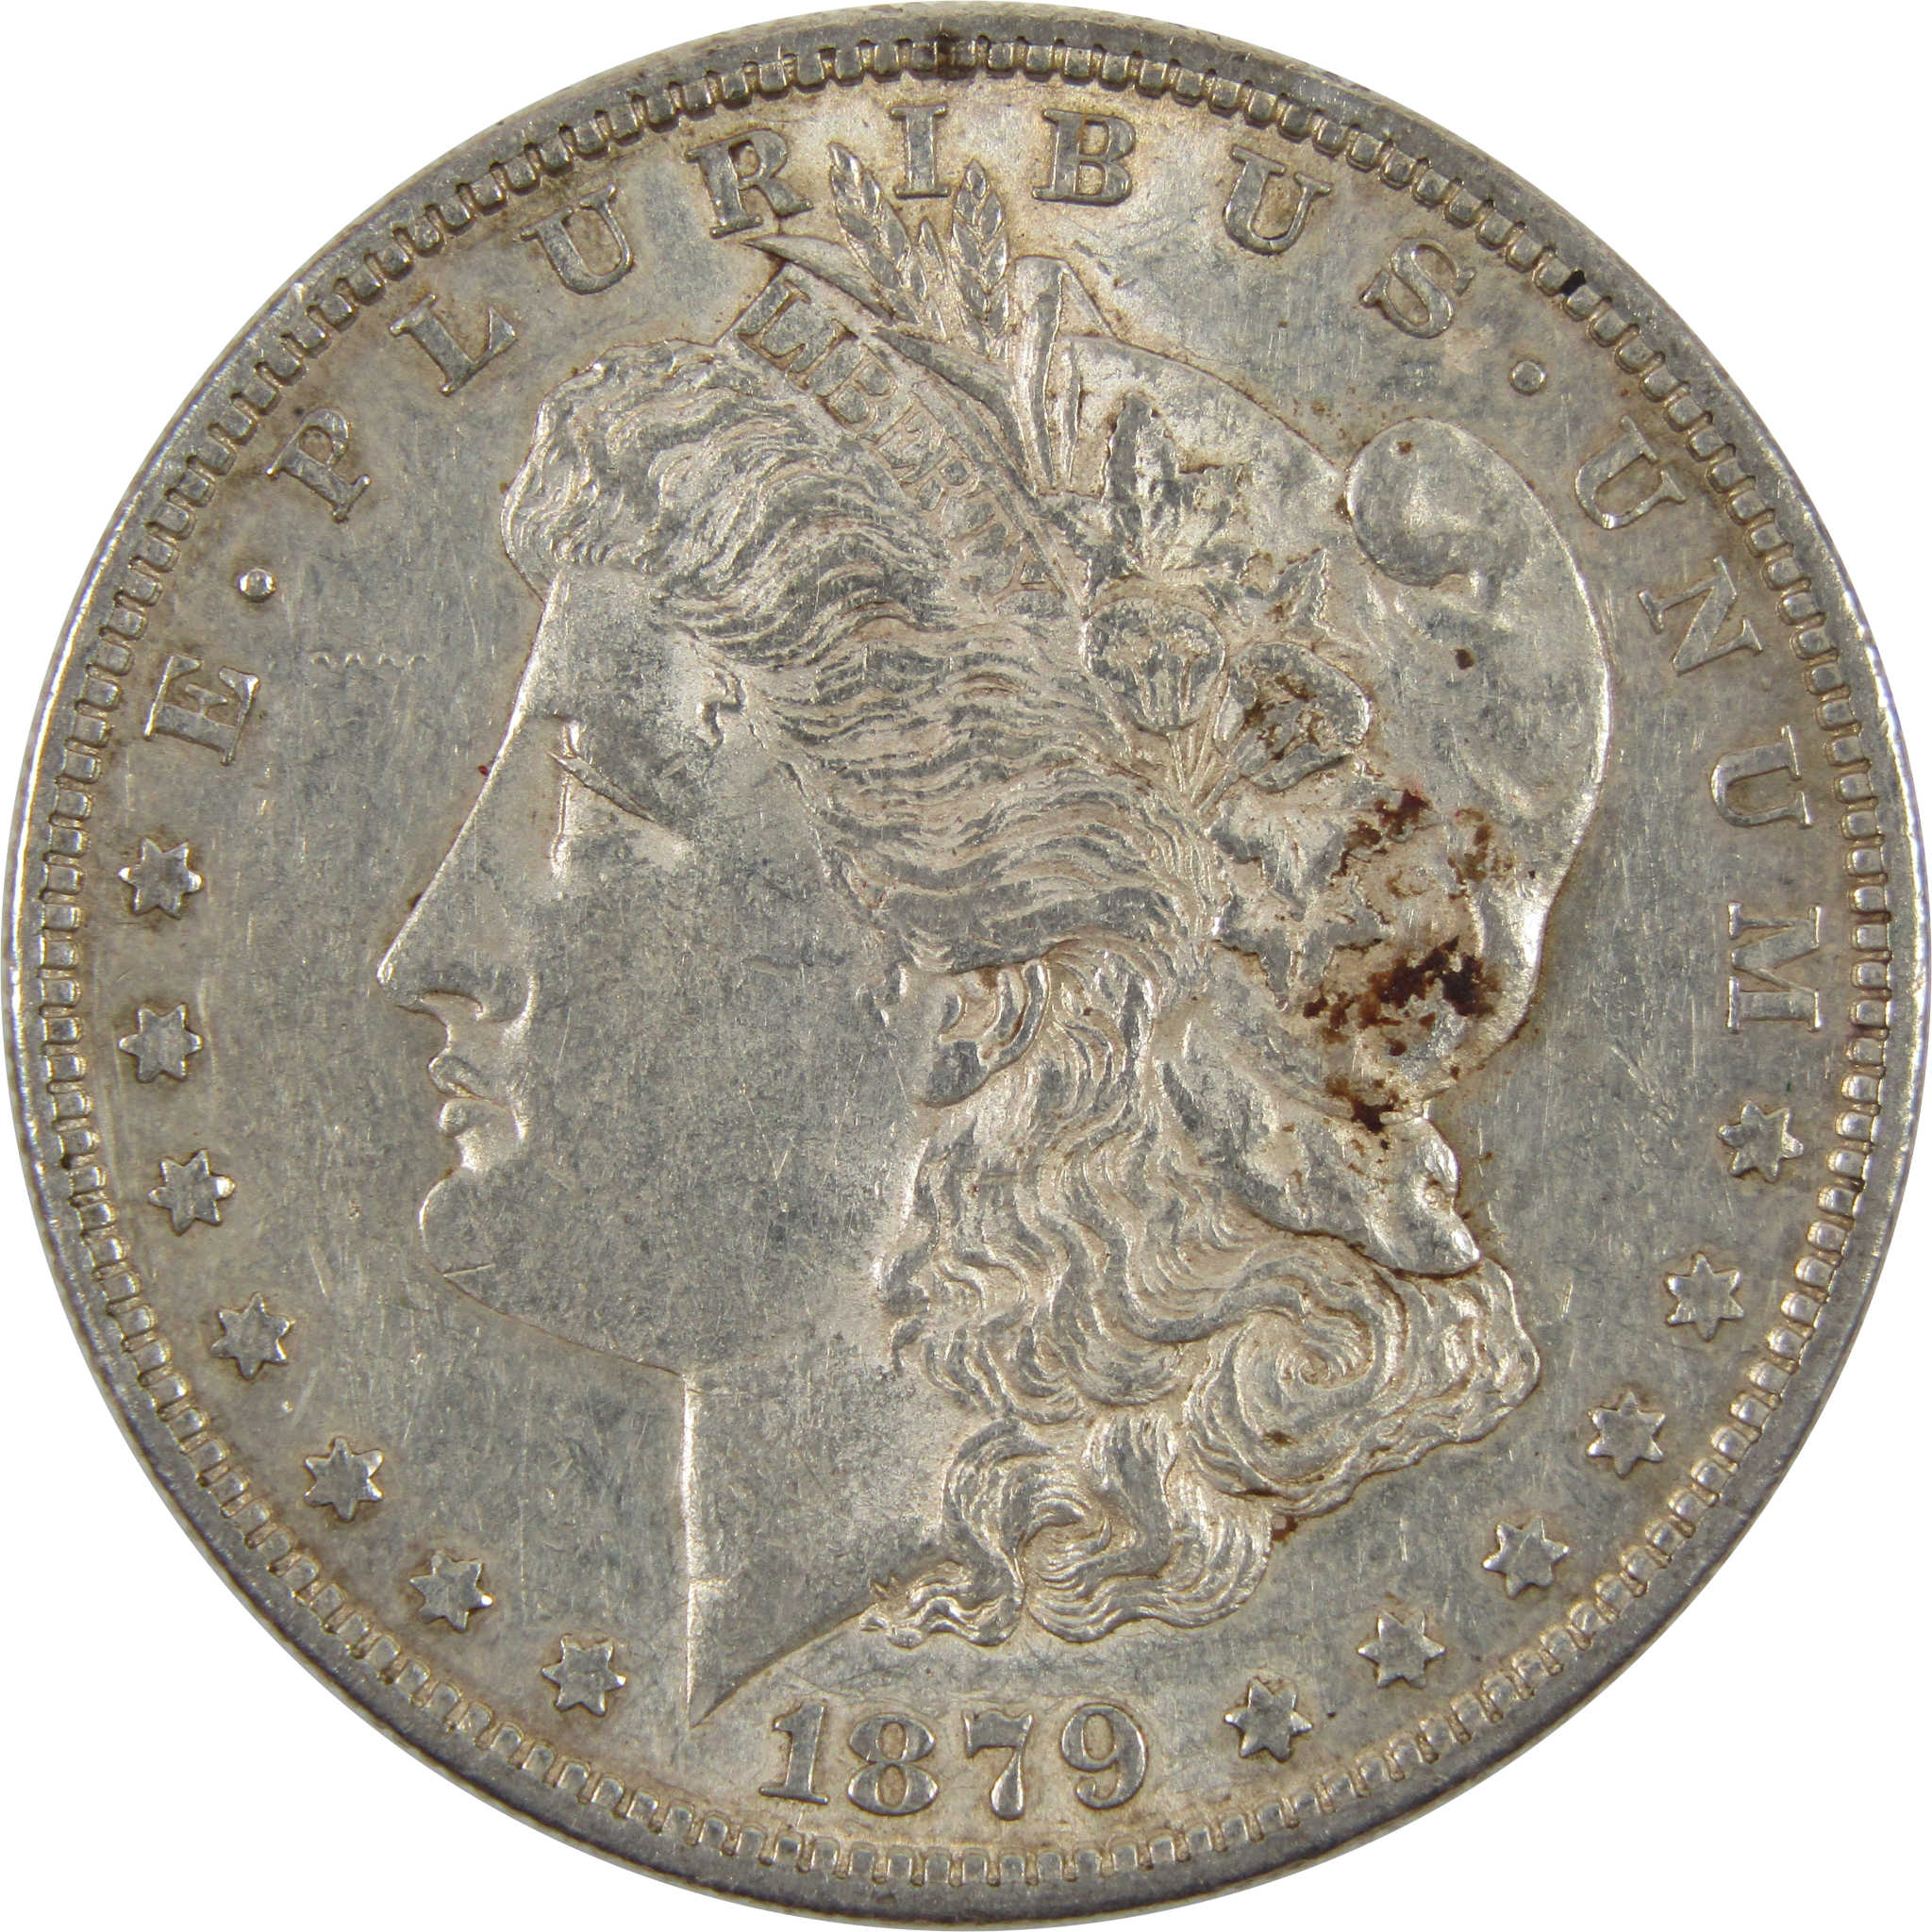 1879 S Morgan Dollar AU About Uncirculated 90% Silver SKU:I7574 - Morgan coin - Morgan silver dollar - Morgan silver dollar for sale - Profile Coins &amp; Collectibles